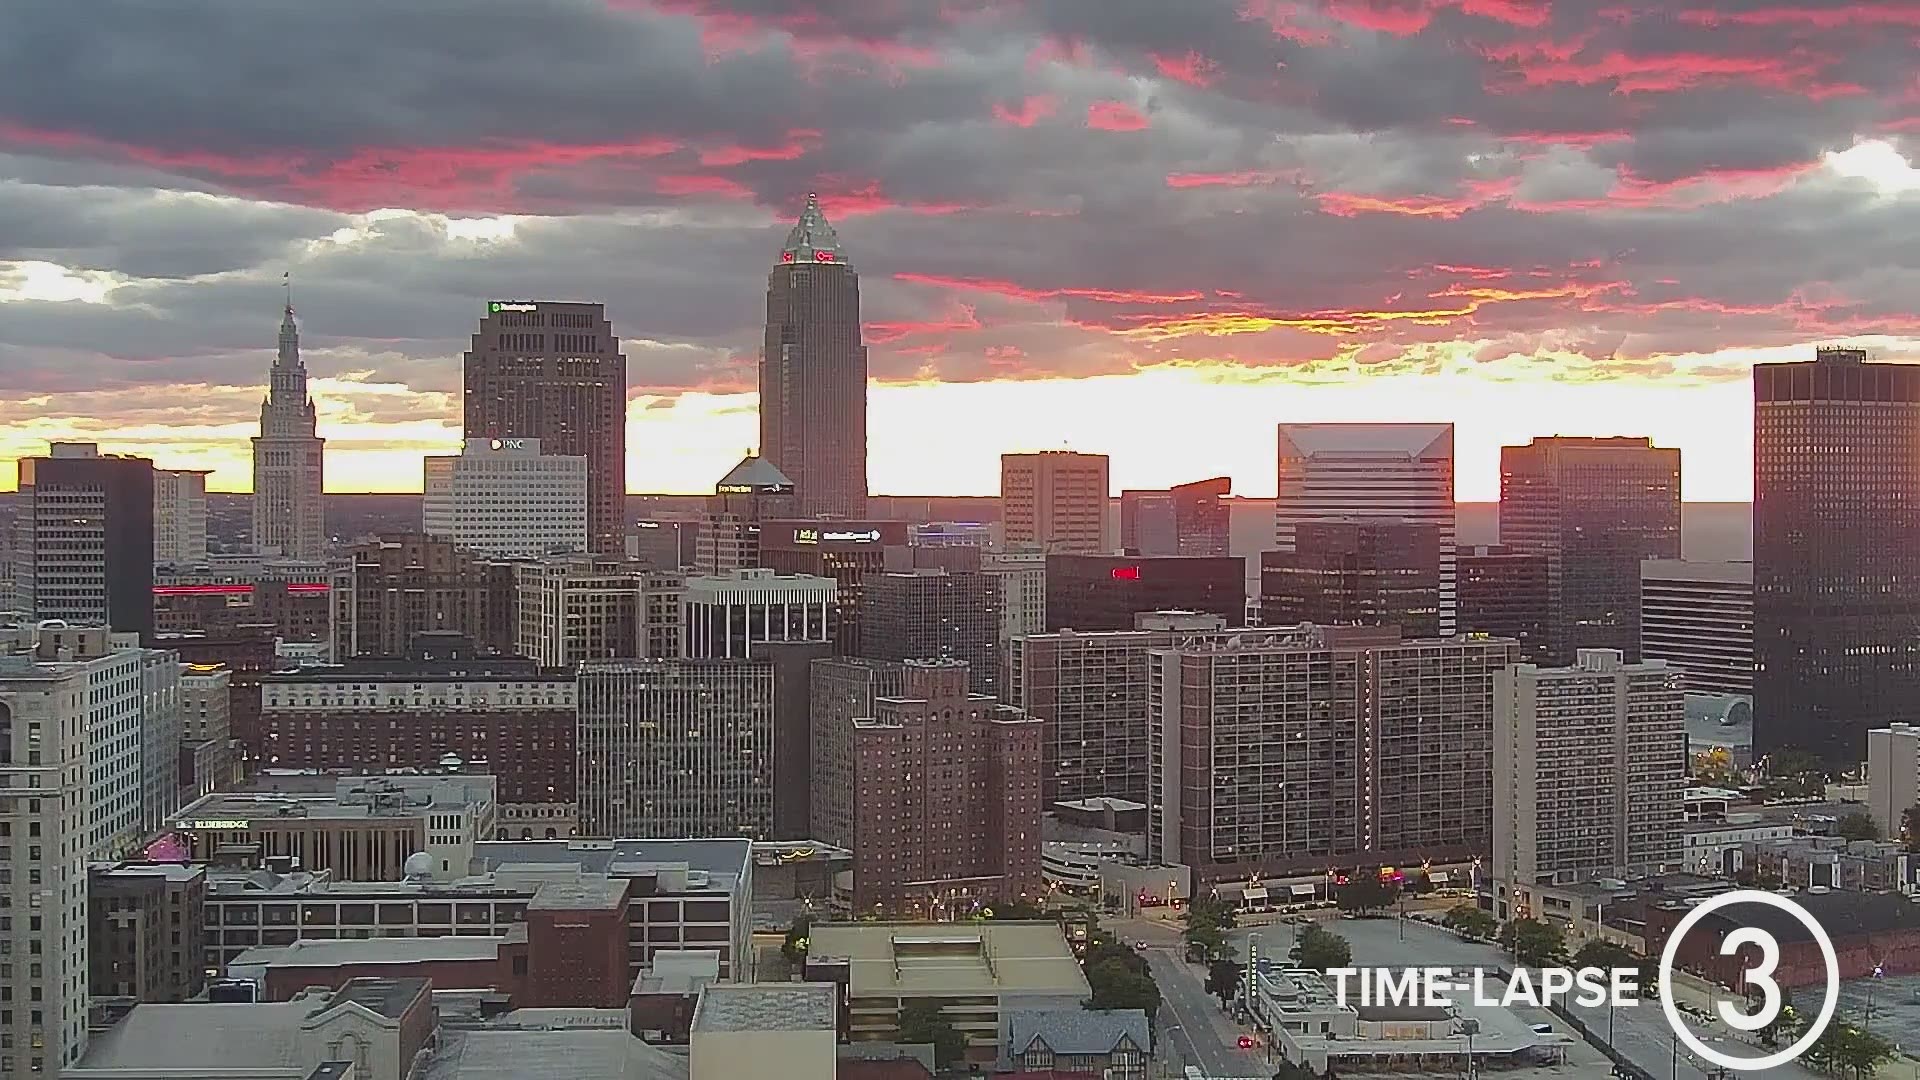 Pretty sunset tonight from the WKYC Studios CSU Cam. If you look carefully to the right of Key Tower near the end of the video, you will see the moon setting too.